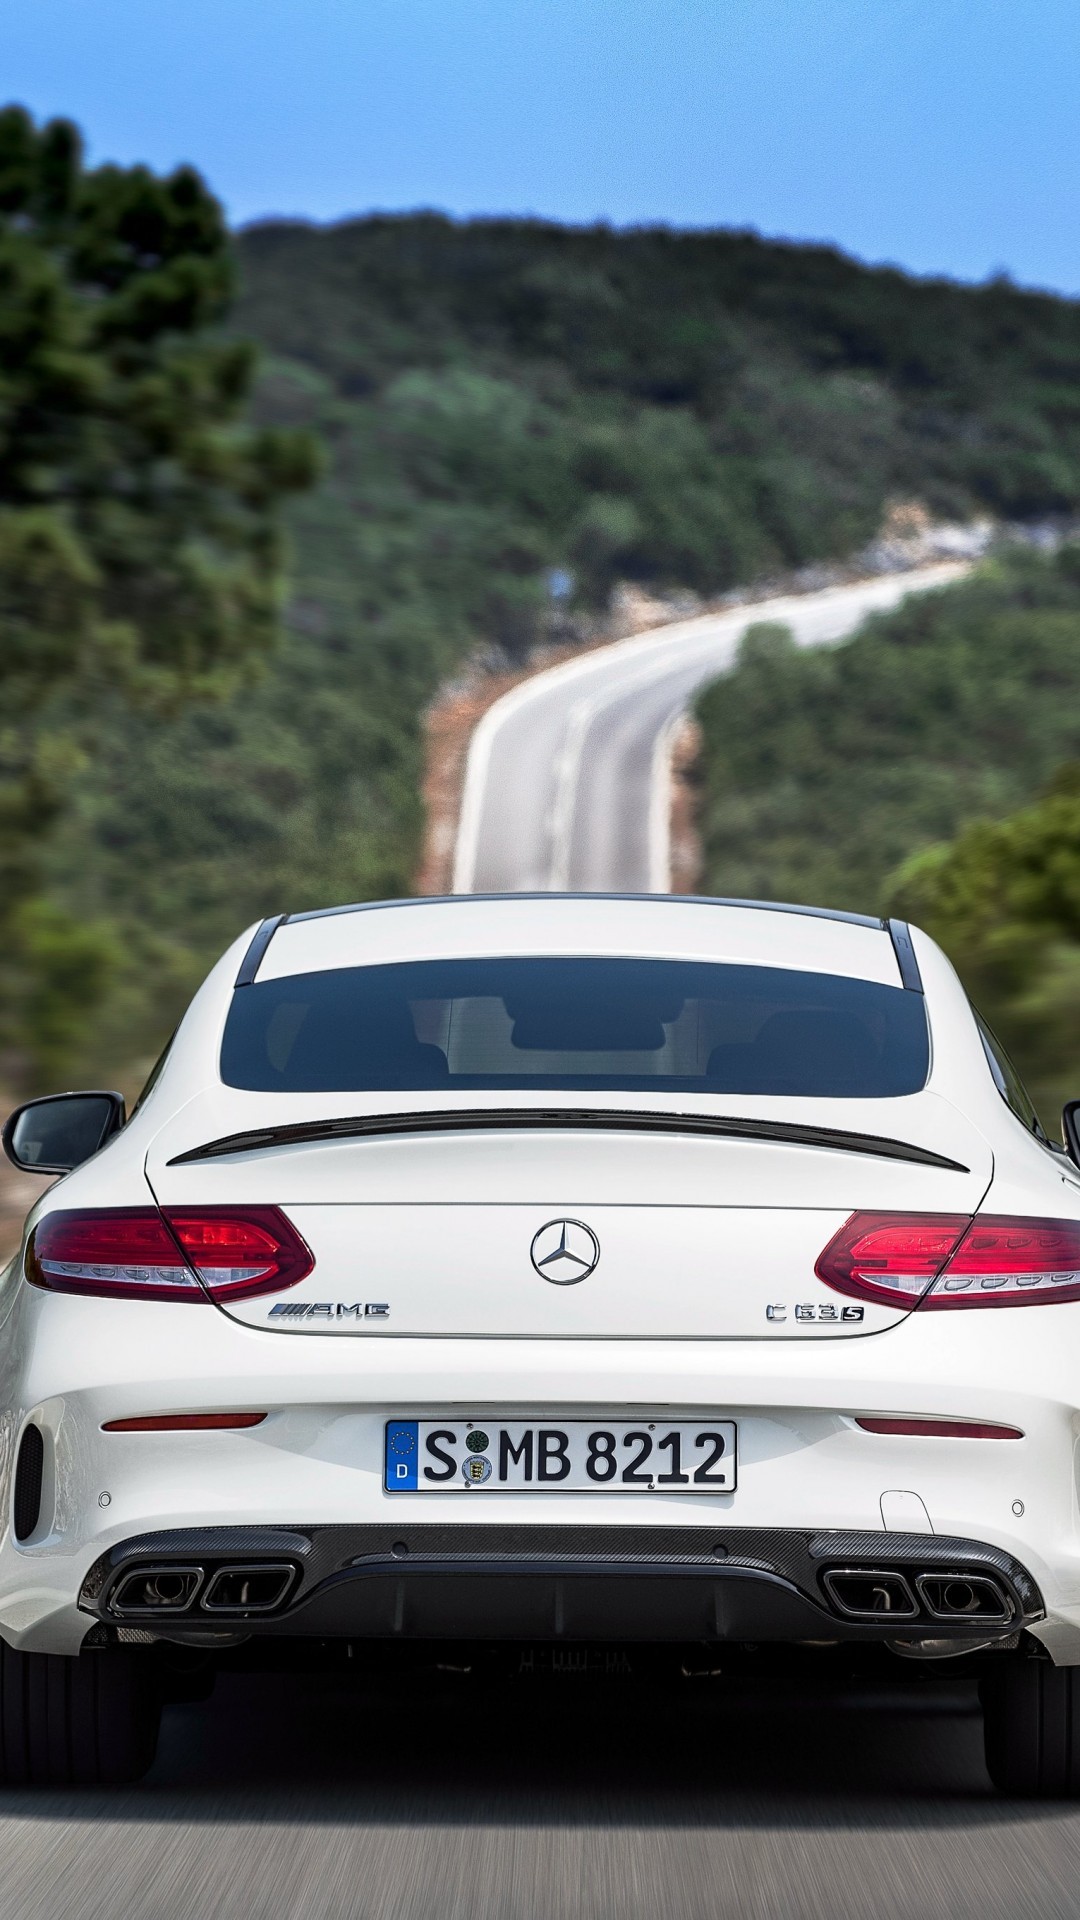 Mercedes Amg C63 S Coupe, Back View, White, Luxury, - S Class Coupe Price South Africa - HD Wallpaper 